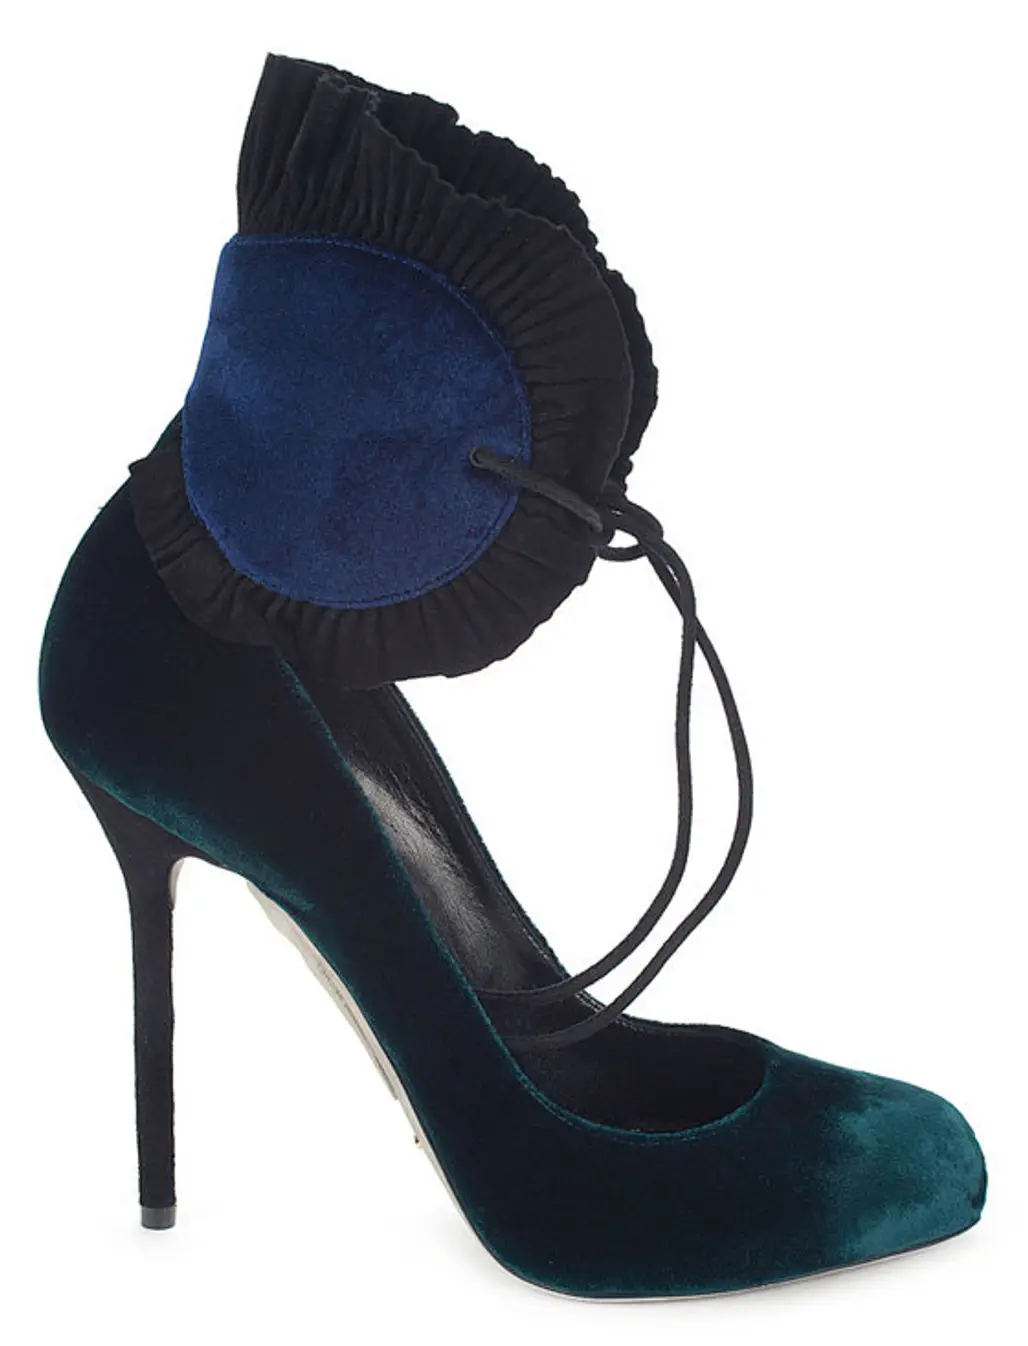 Adorable Ruffle Pump by Sergio Rossi